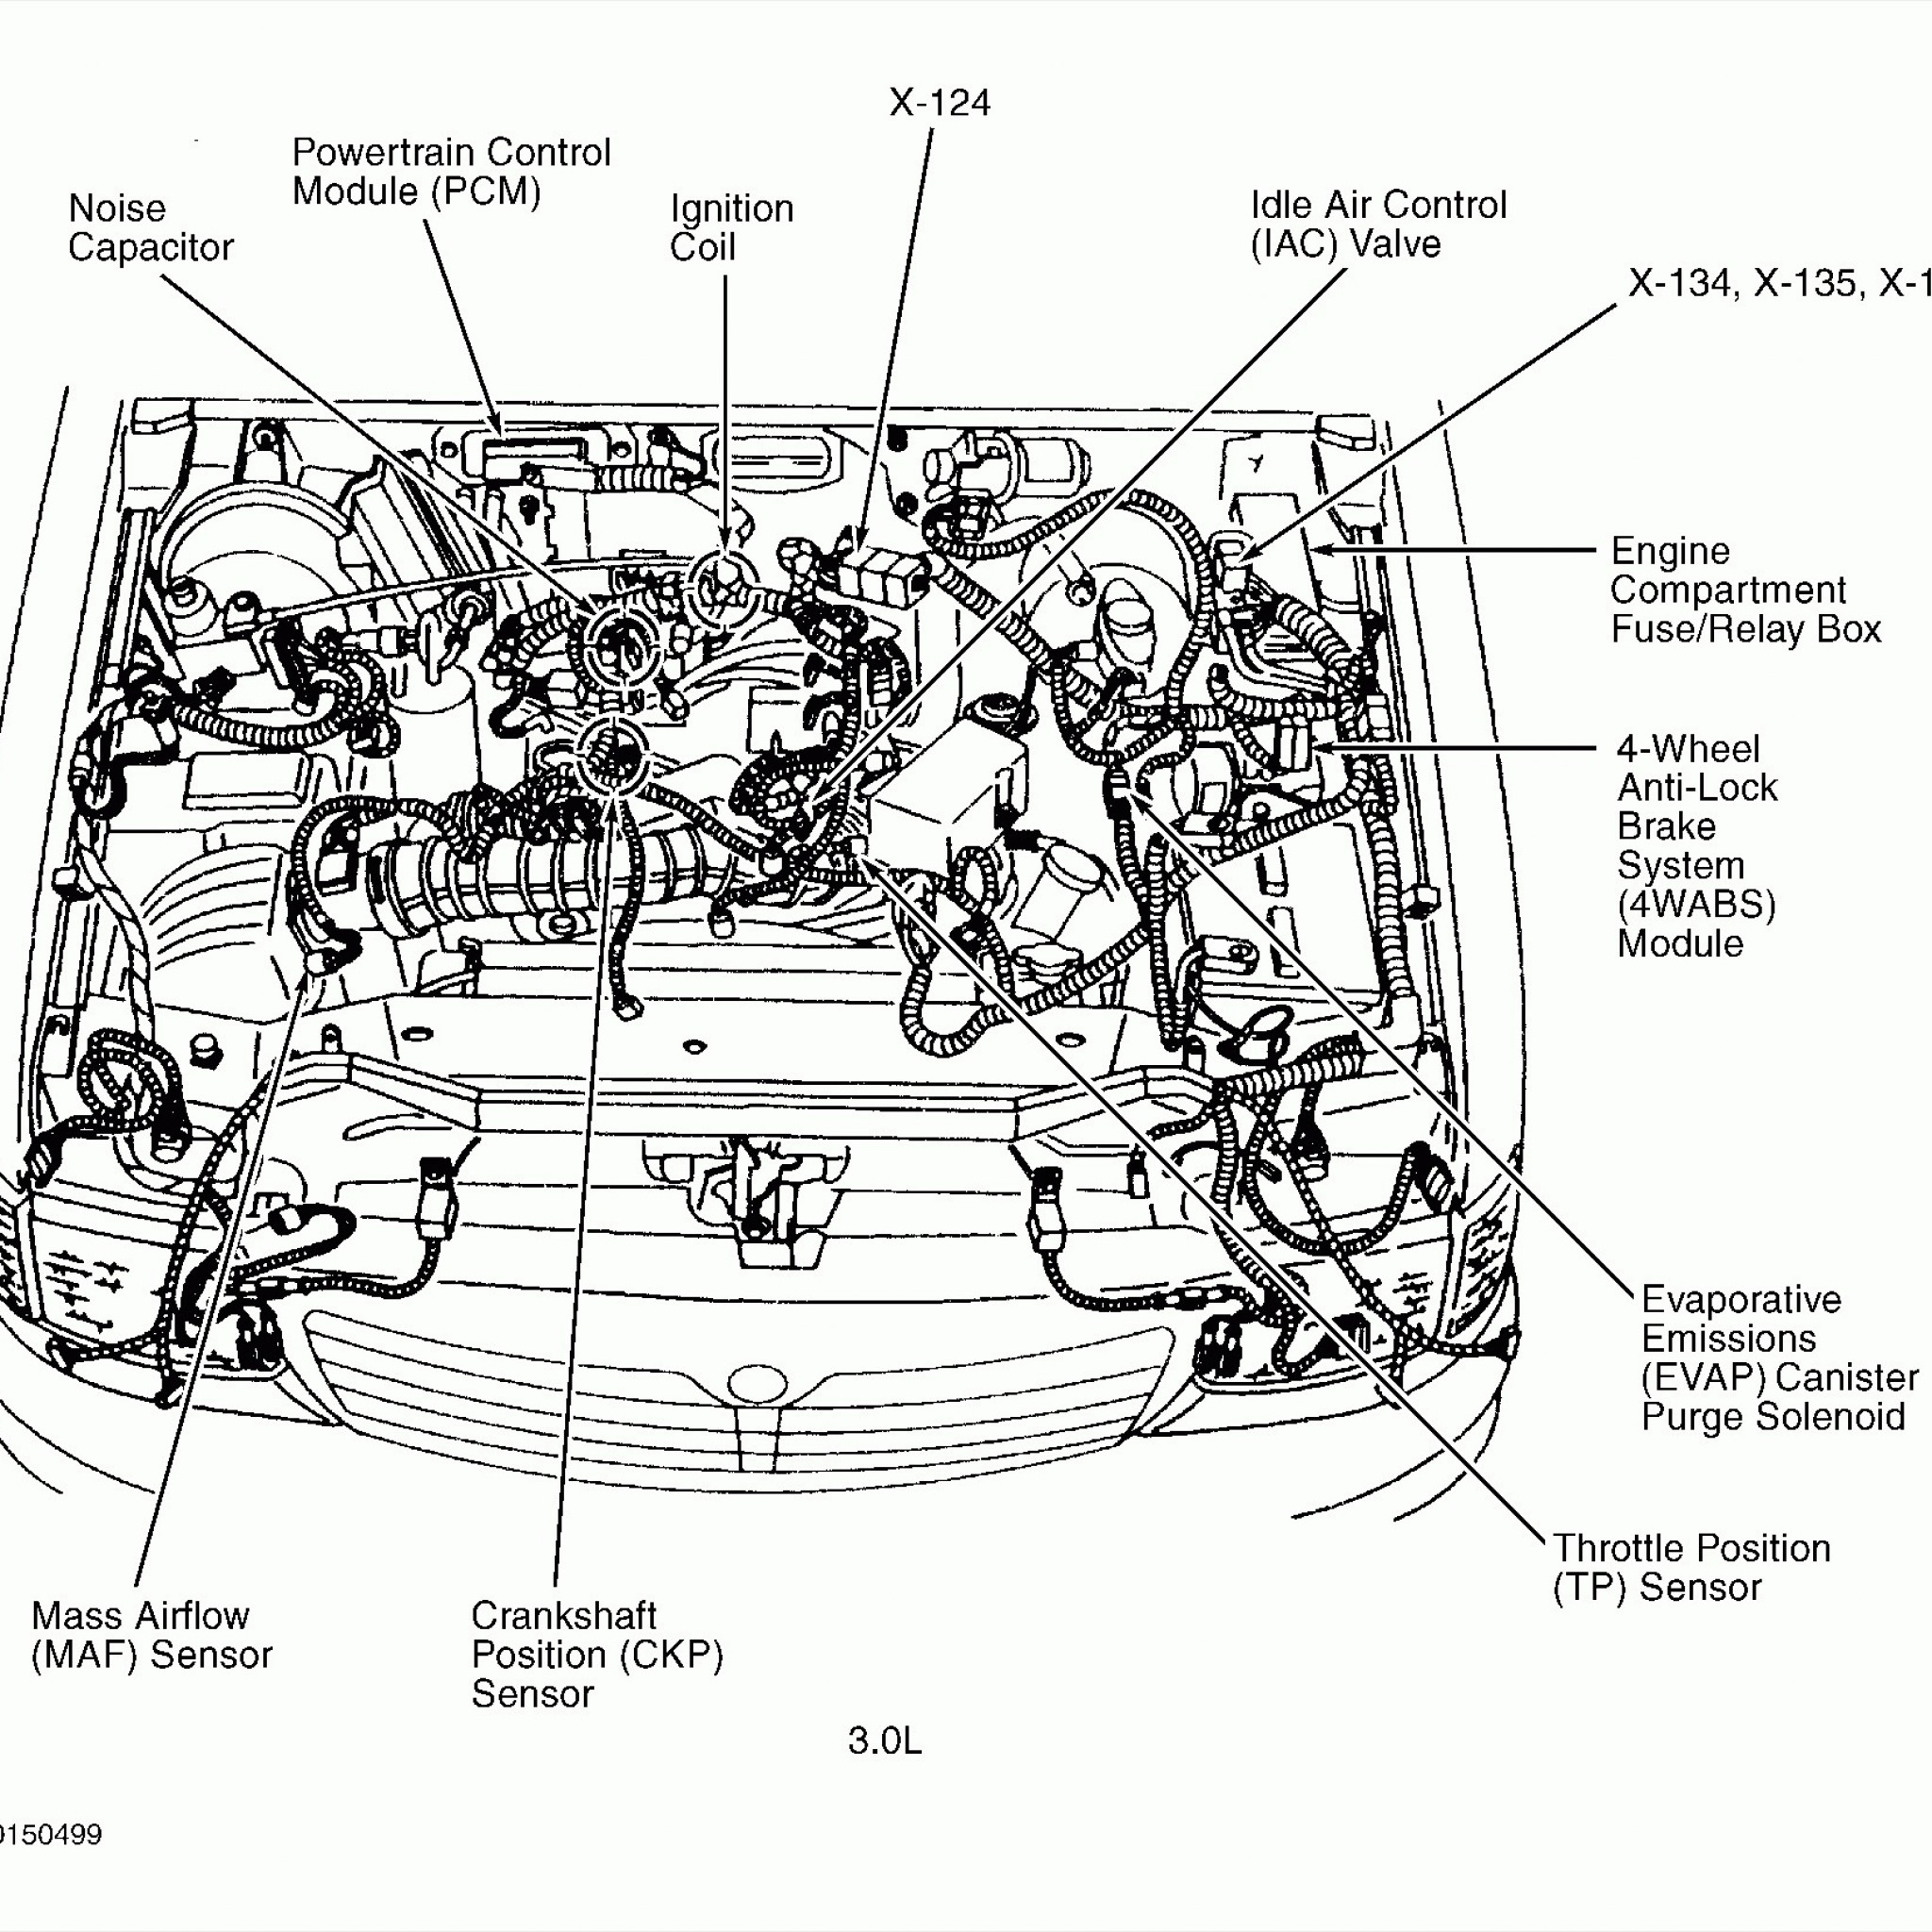 2008 Ford Escape 3.0 Firing Order | Wiring and Printable